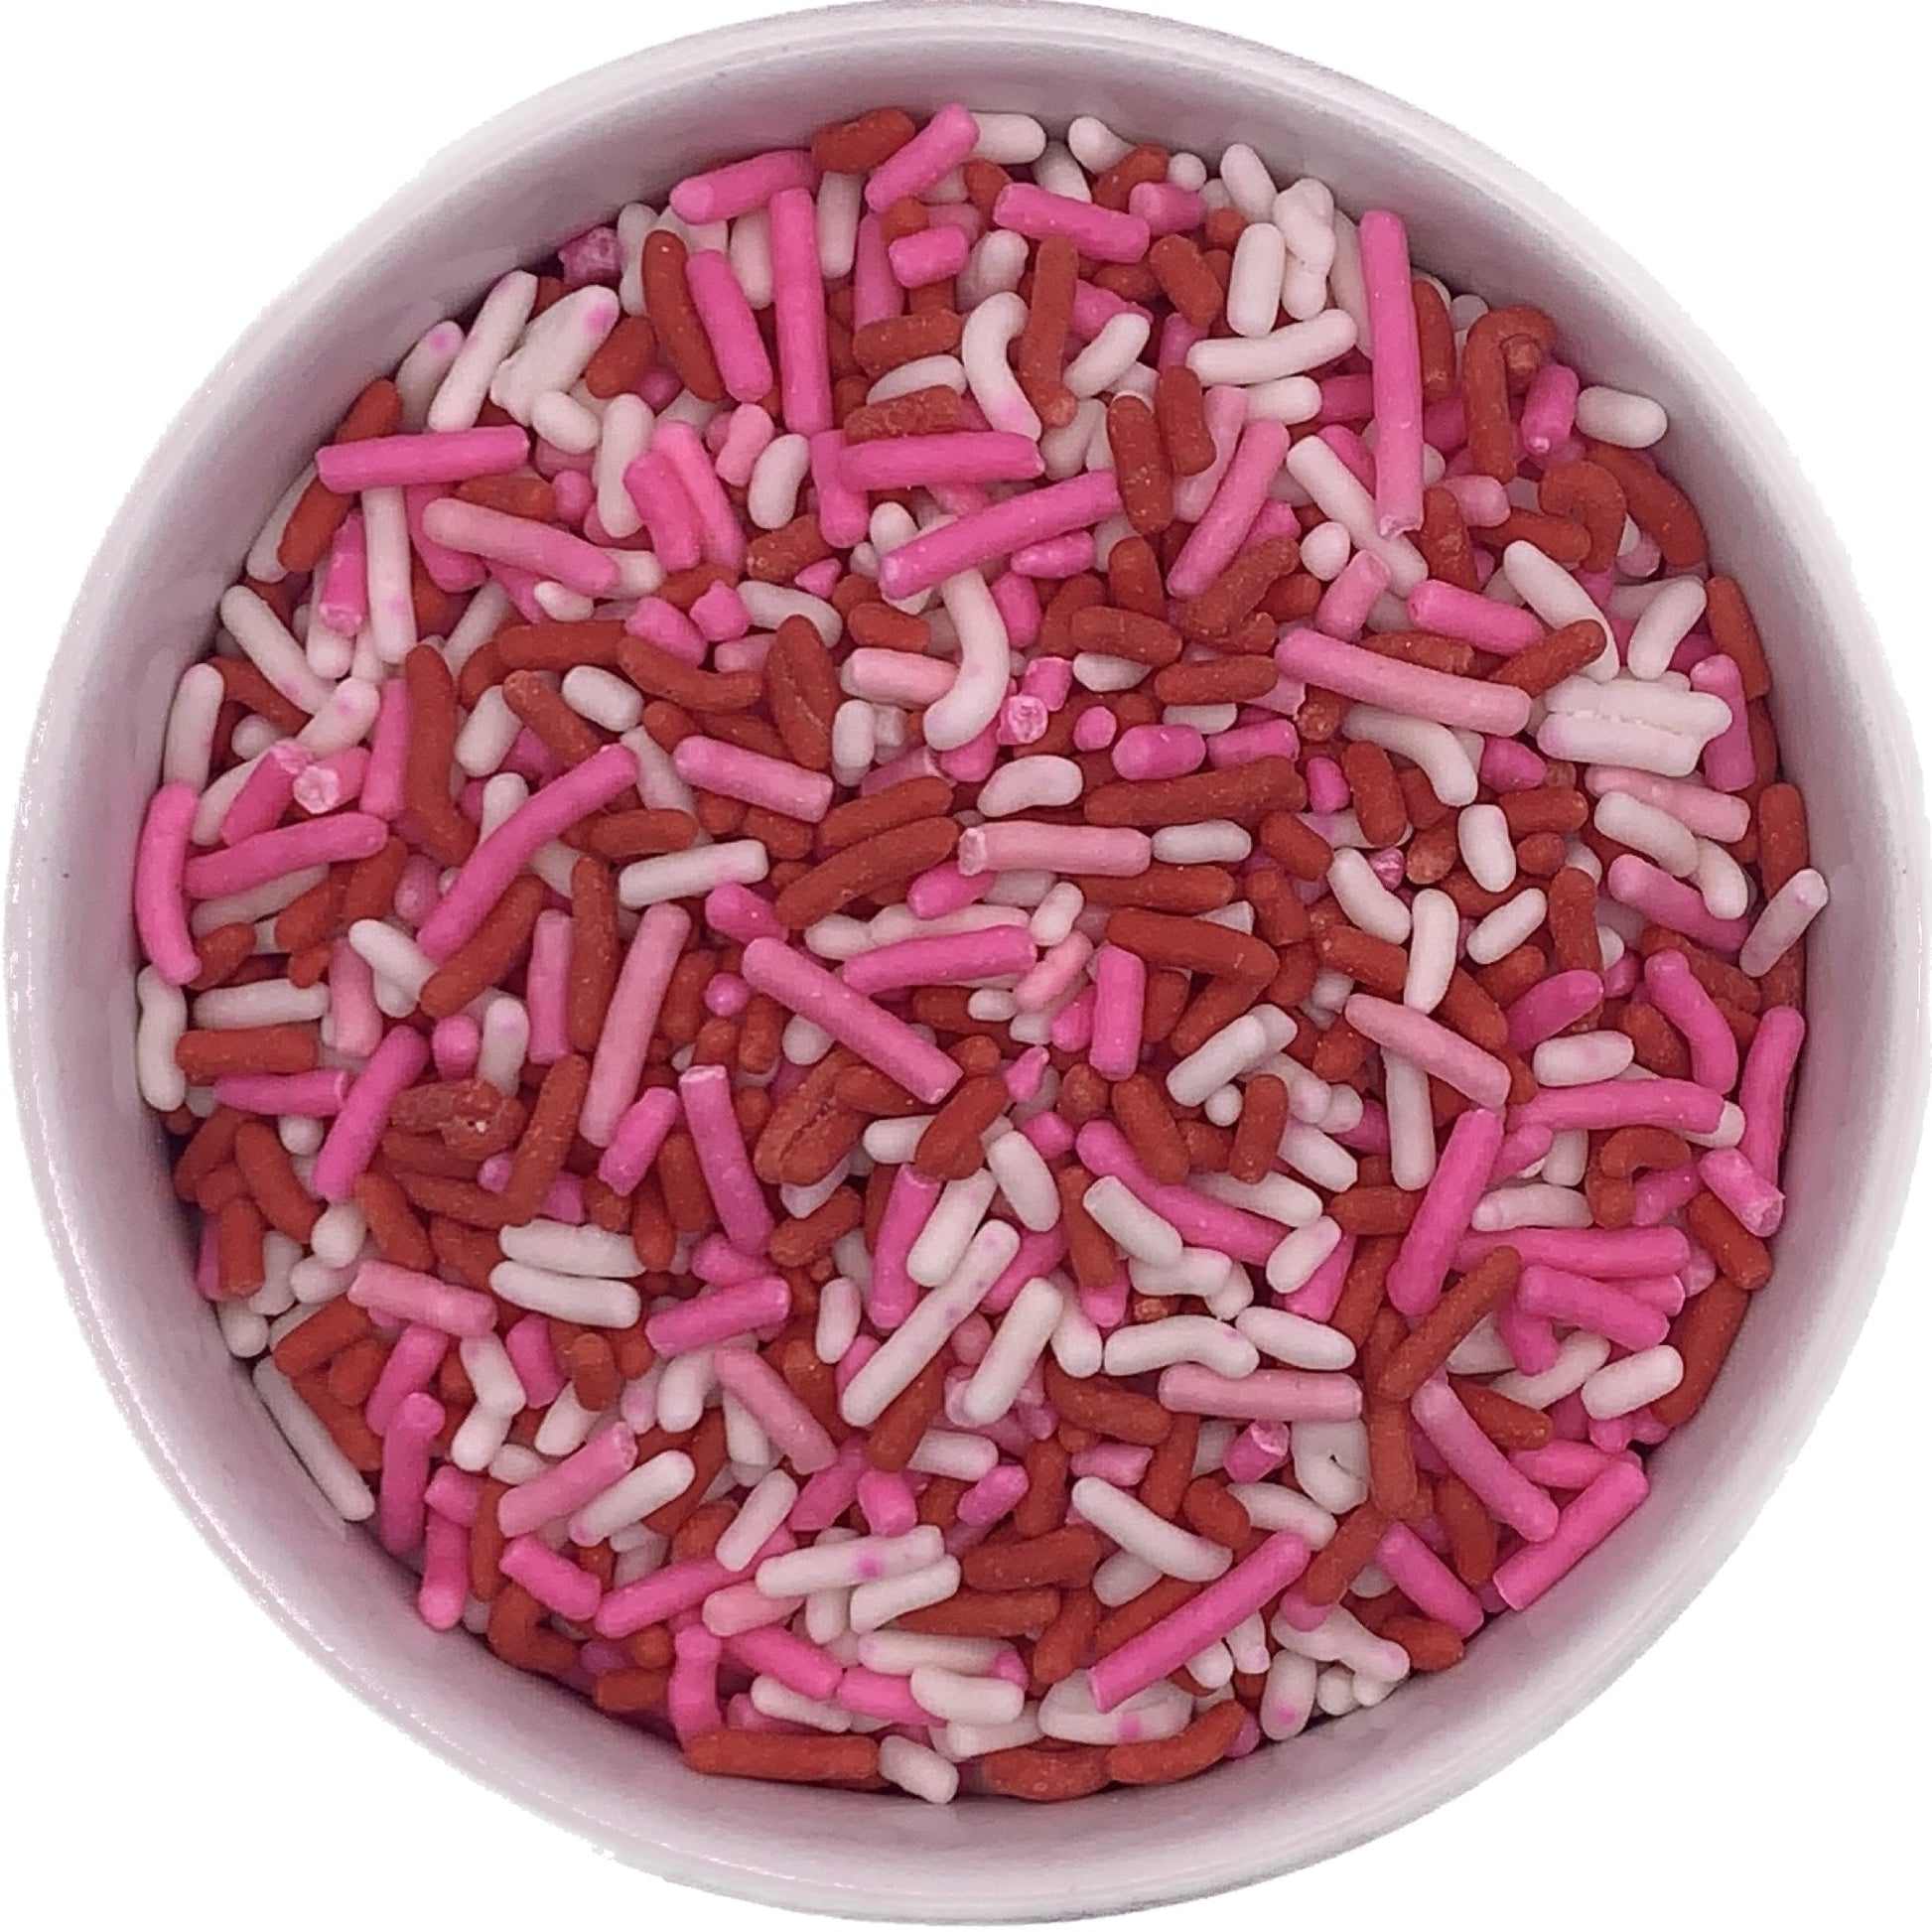 Red, Pink, and White Jimmies Sprinkles